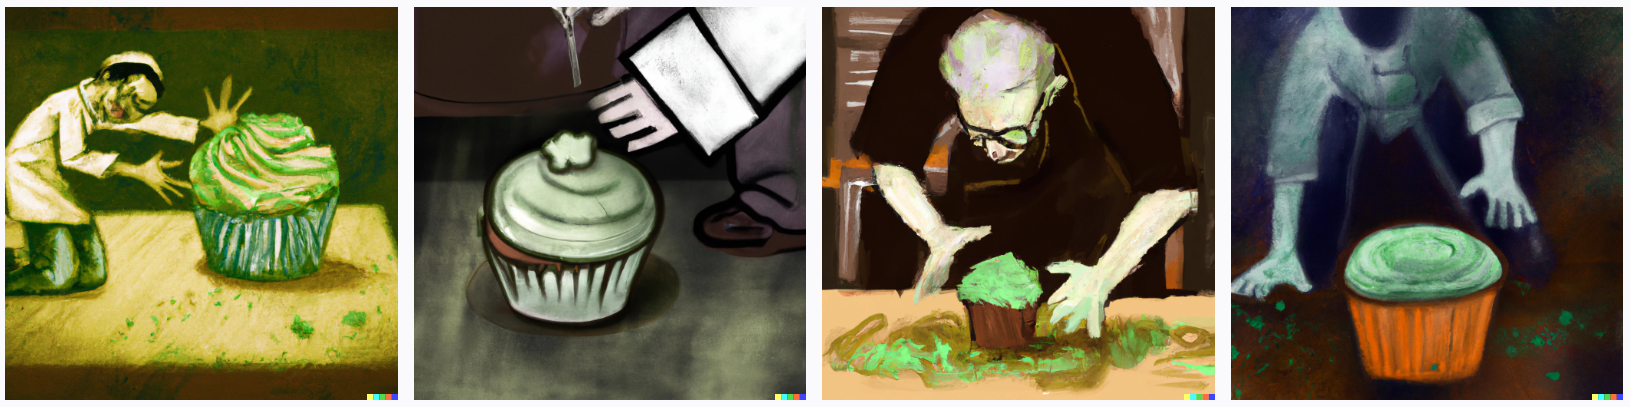 muffin man dropping a quarter-ounce green rosette of frosting onto the floor of a dark laboratory pastel art vibrant